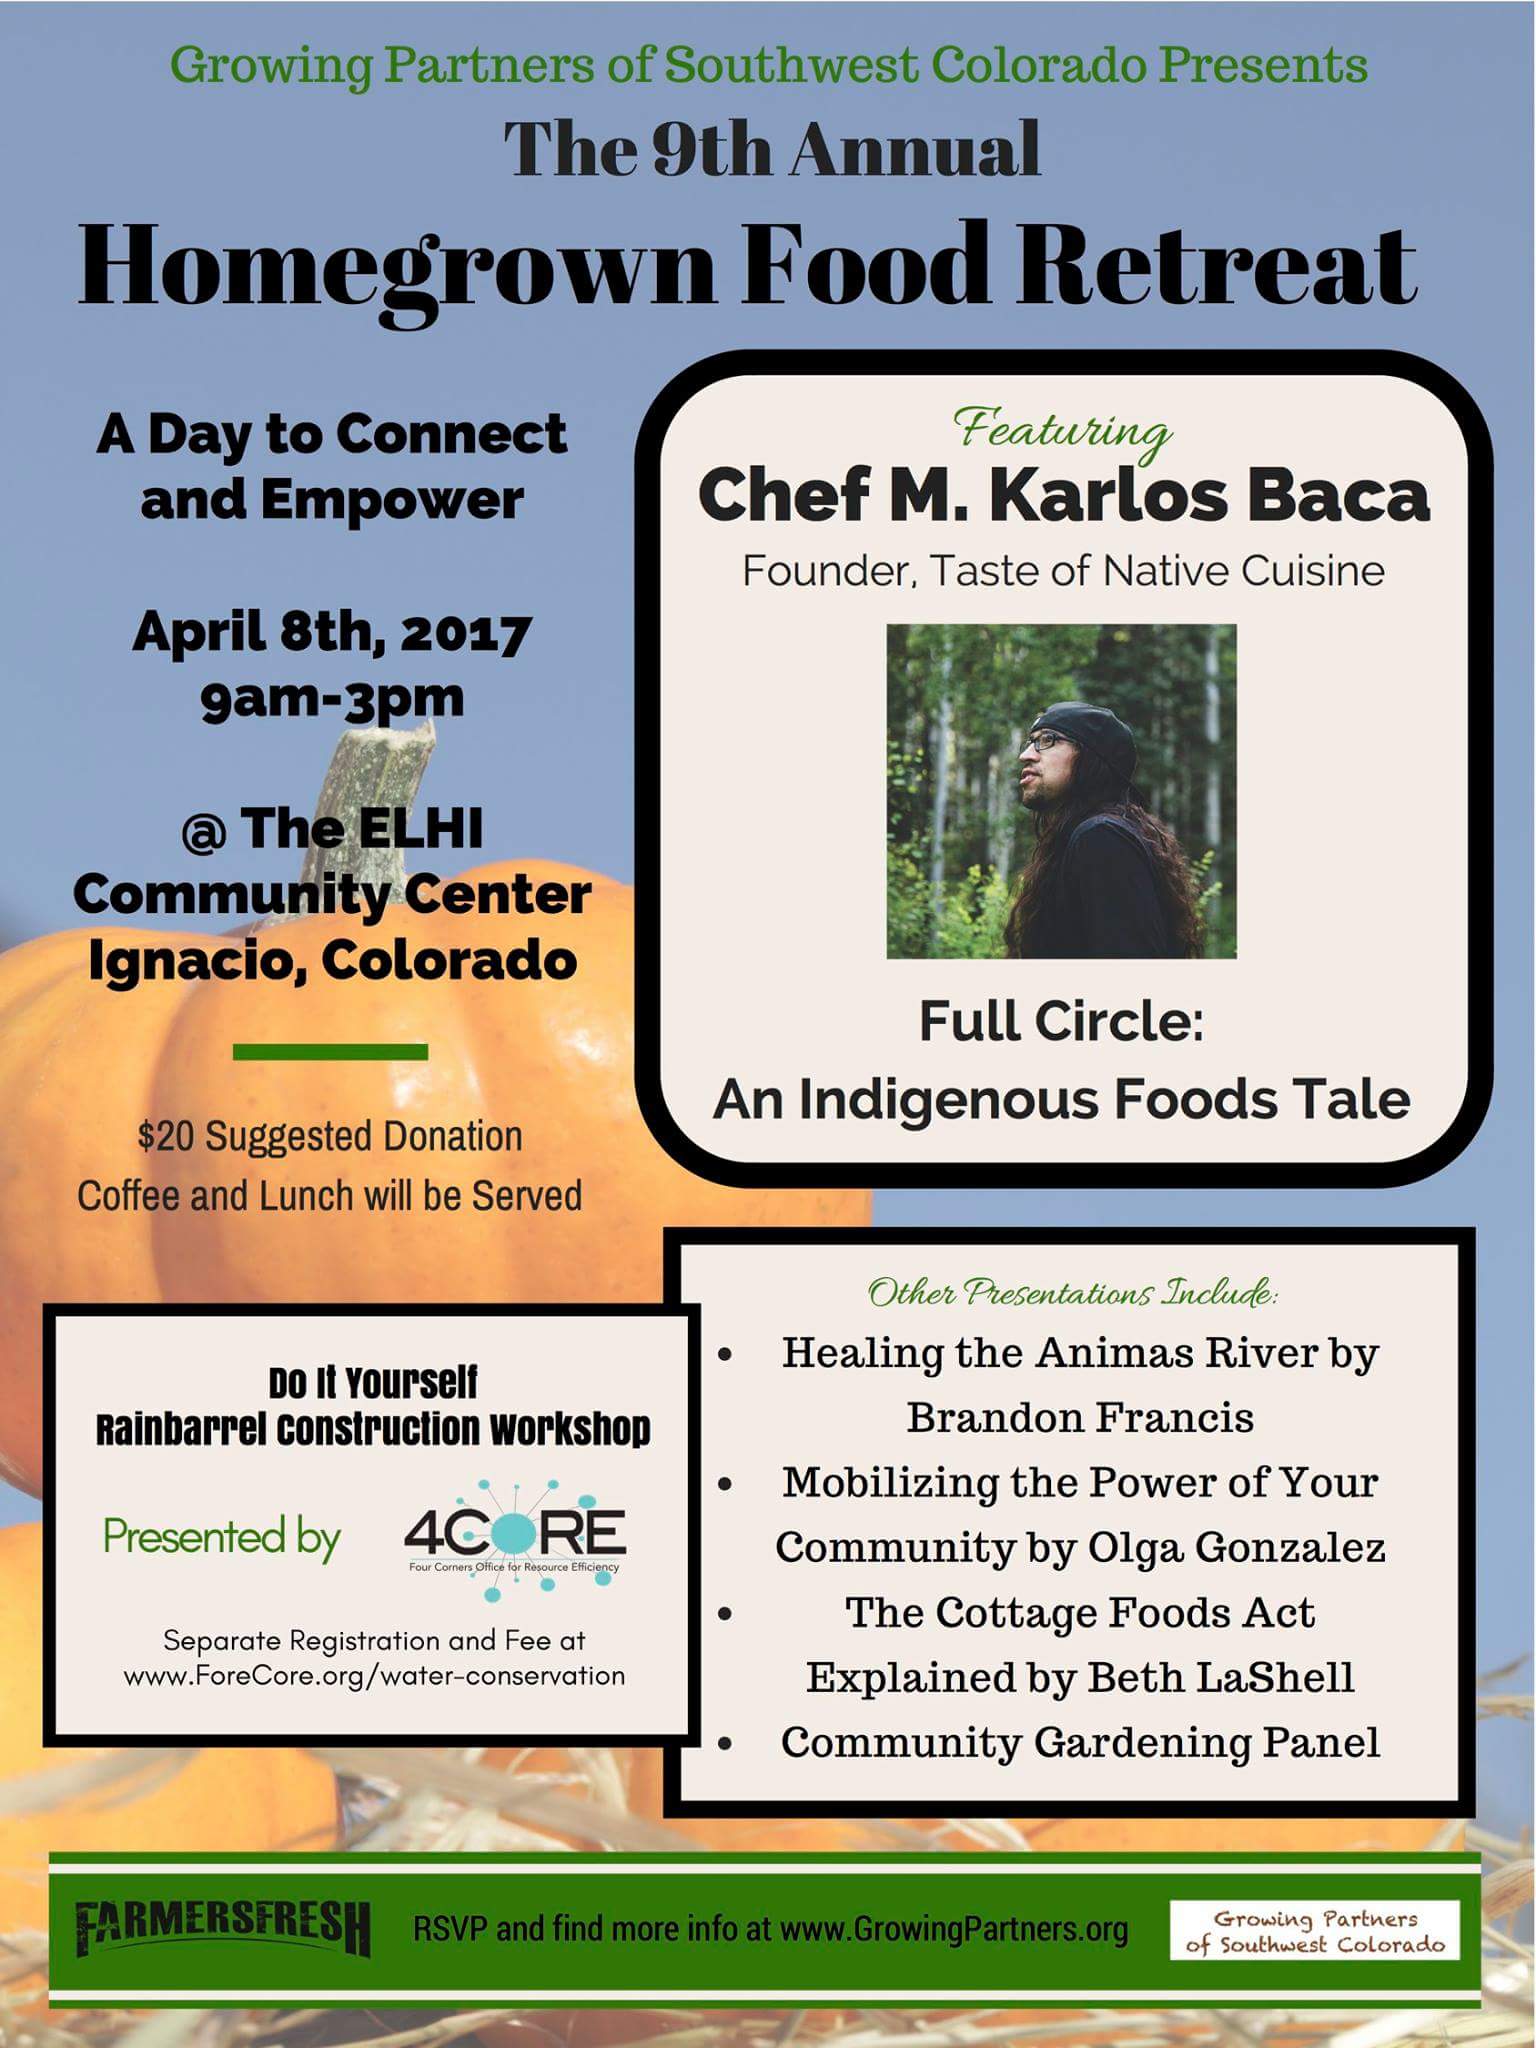 The 9th Annual Homegrown Food Retreat